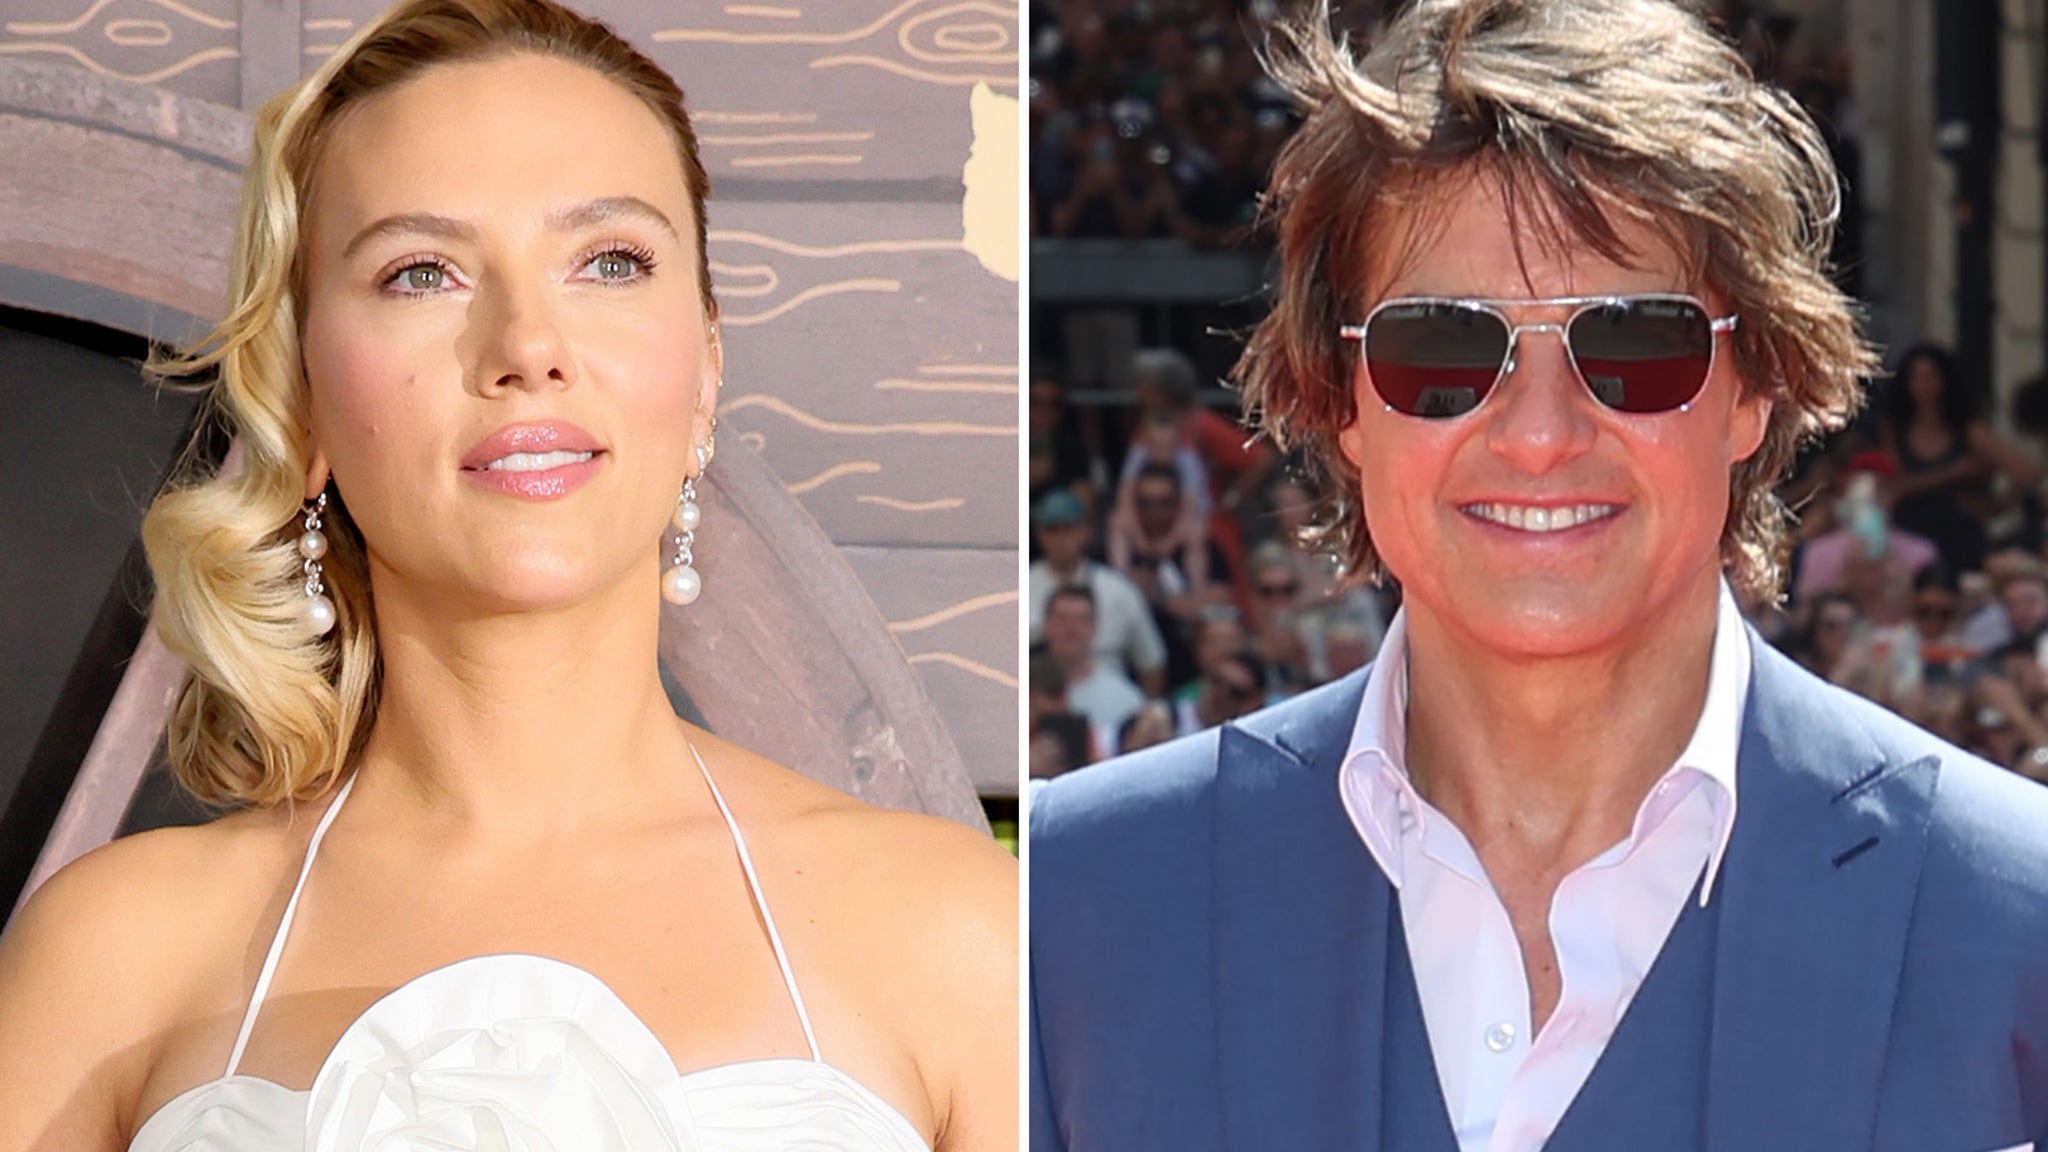 Tom Cruise, Scarlett Johansson Are “Absolutely” Going to Work Together –  The Hollywood Reporter